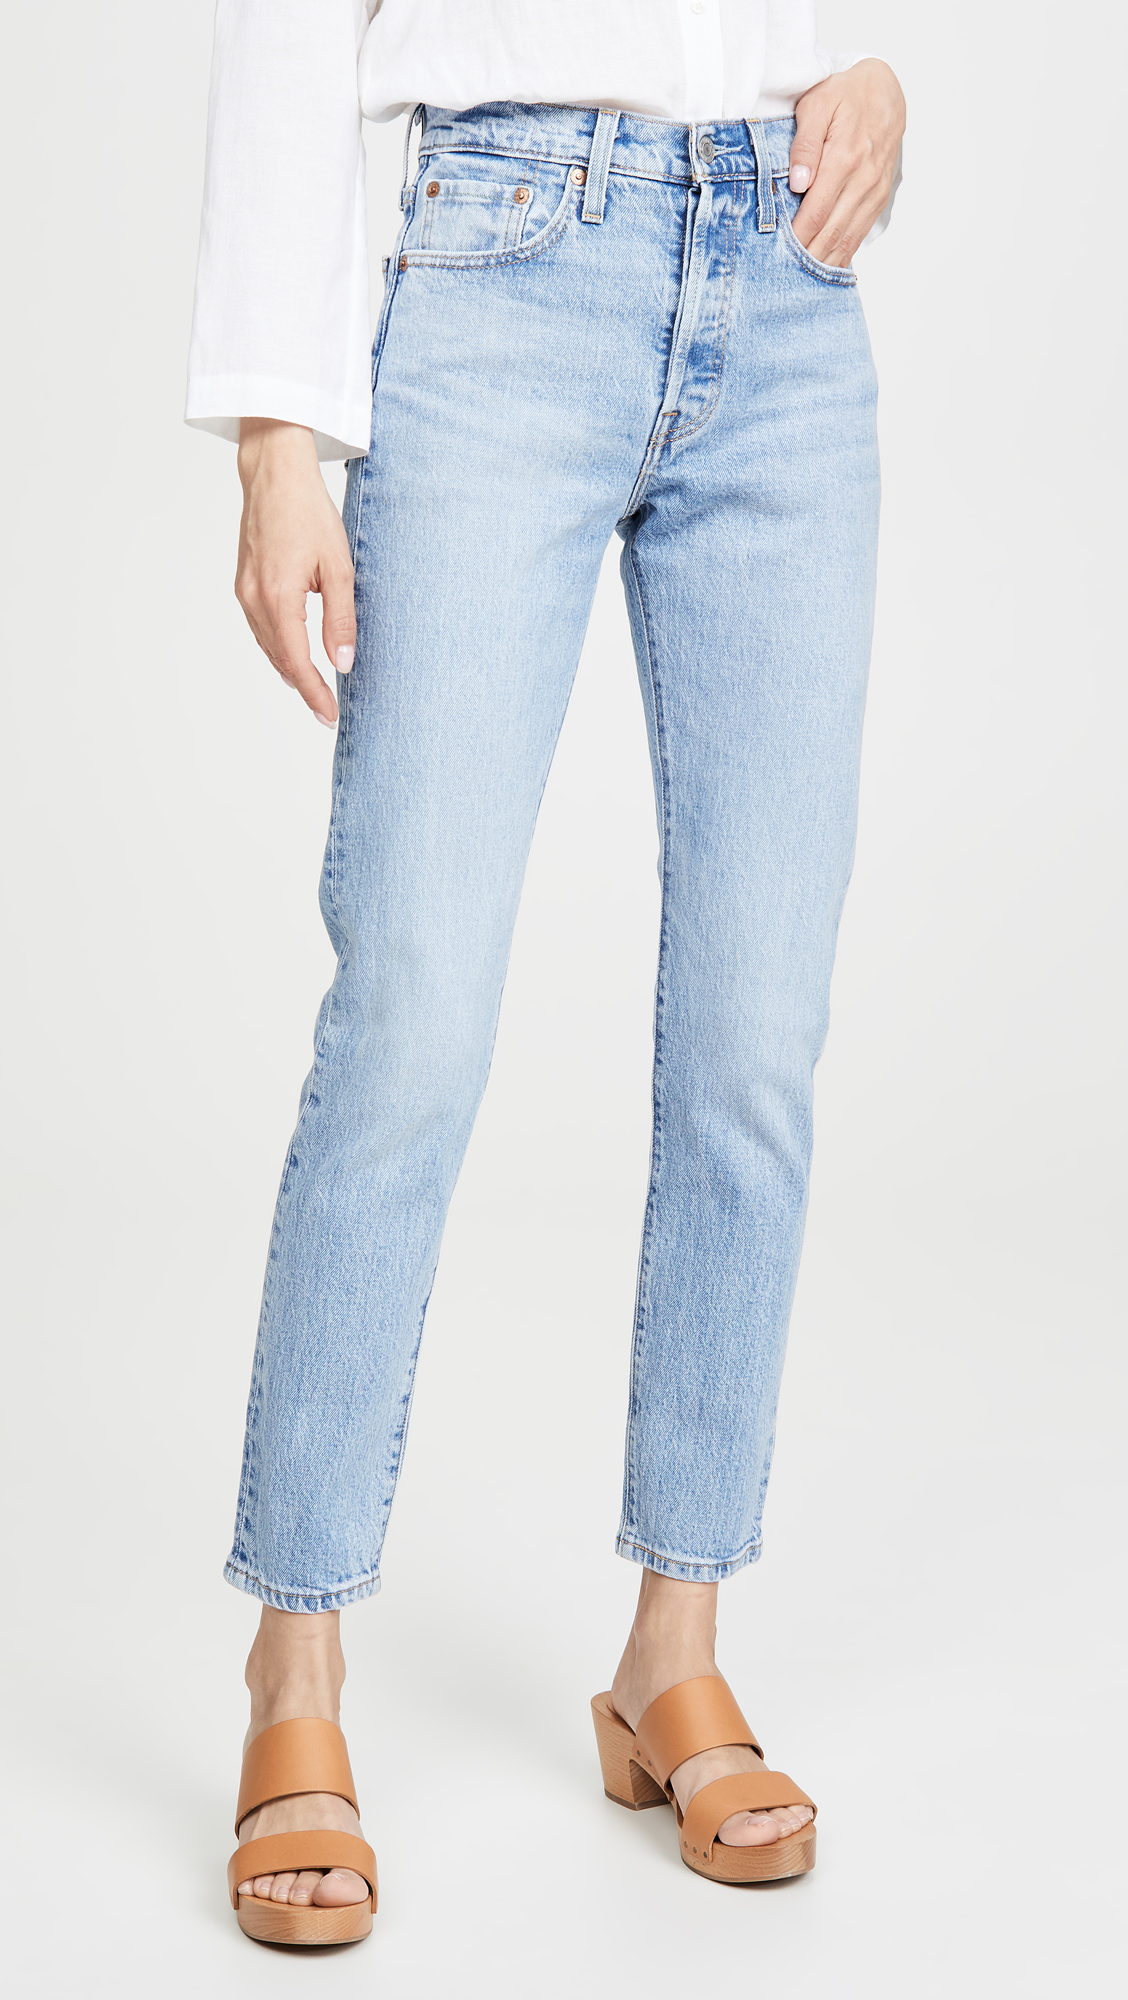 The 5 Most Popular Levi's Jeans for Women | Who What Wear